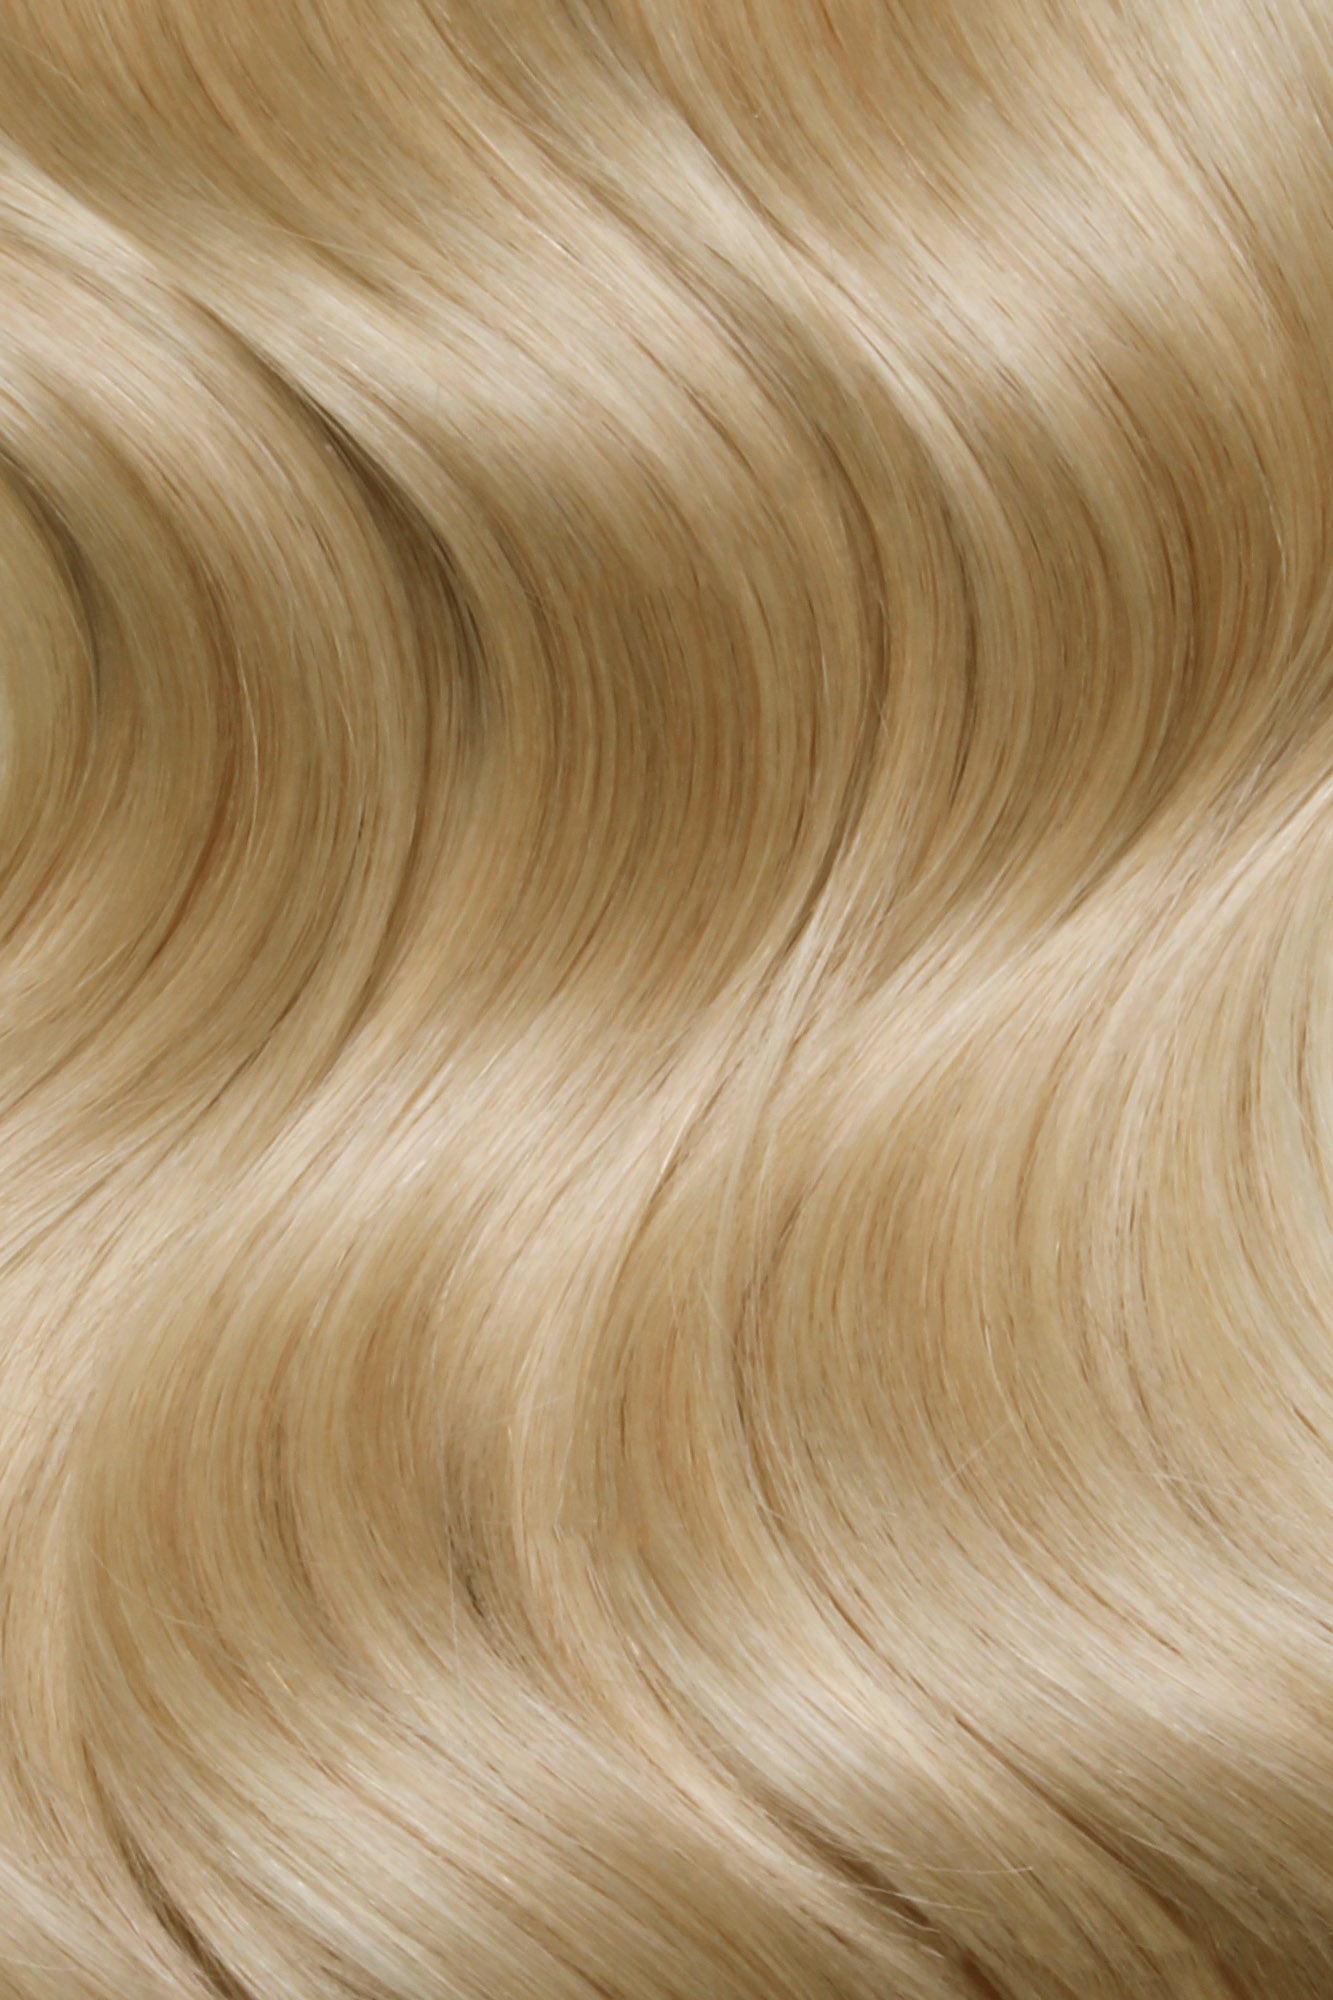 SEAMLESS® Flat Weft 22 Inches - SWAY Hair Extensions Natural-Ash-Blonde-20 Natural SEAMLESS® Flat Weft 22 Inches extensions. Thin, flexible, and discreet. 100% Double Drawn Remy Human Hair. Versatile and reusable